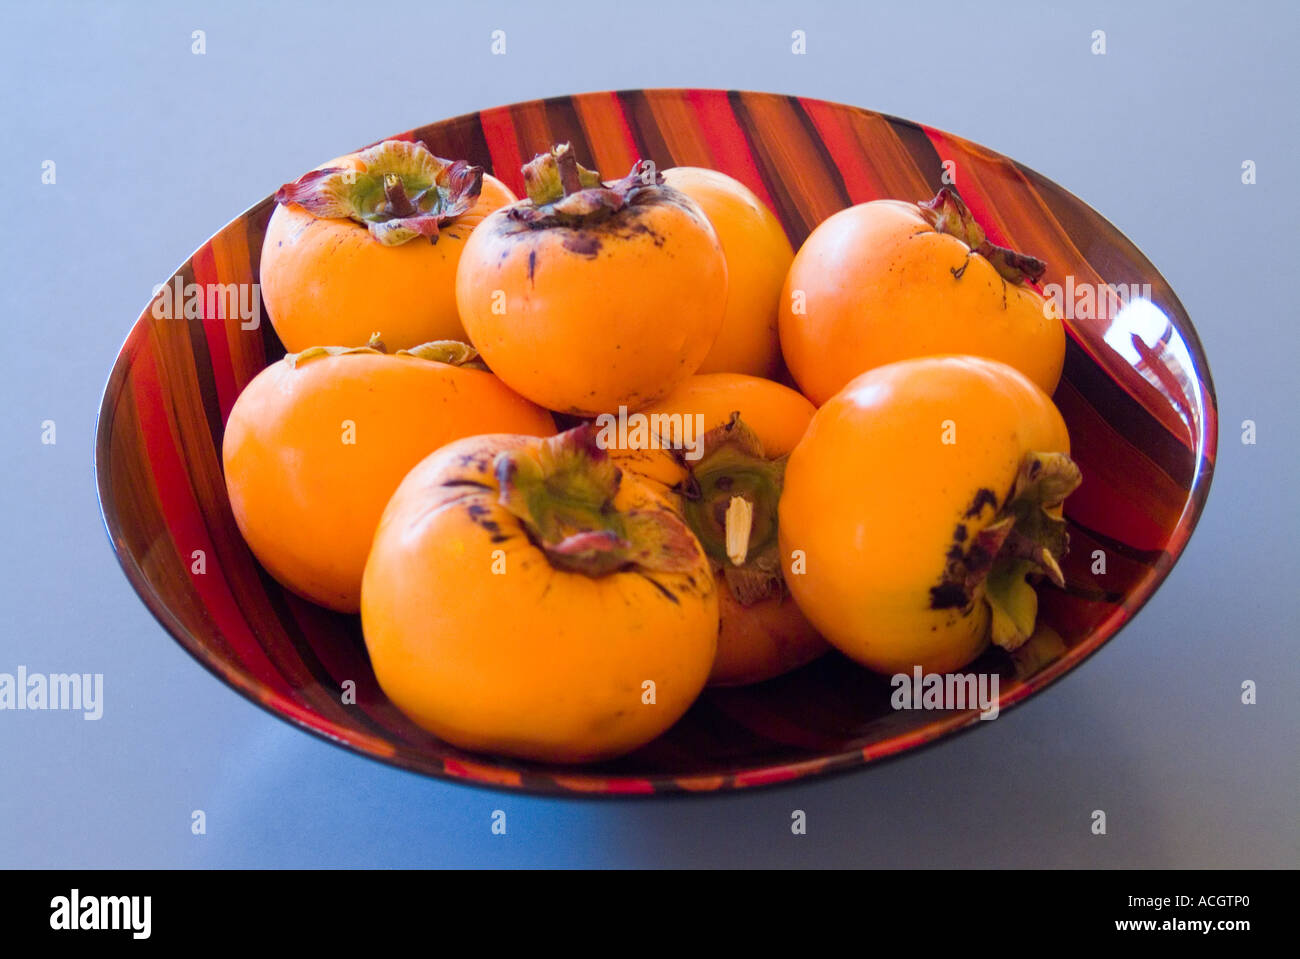 Persimmon in a lacquer bowl Stock Photo